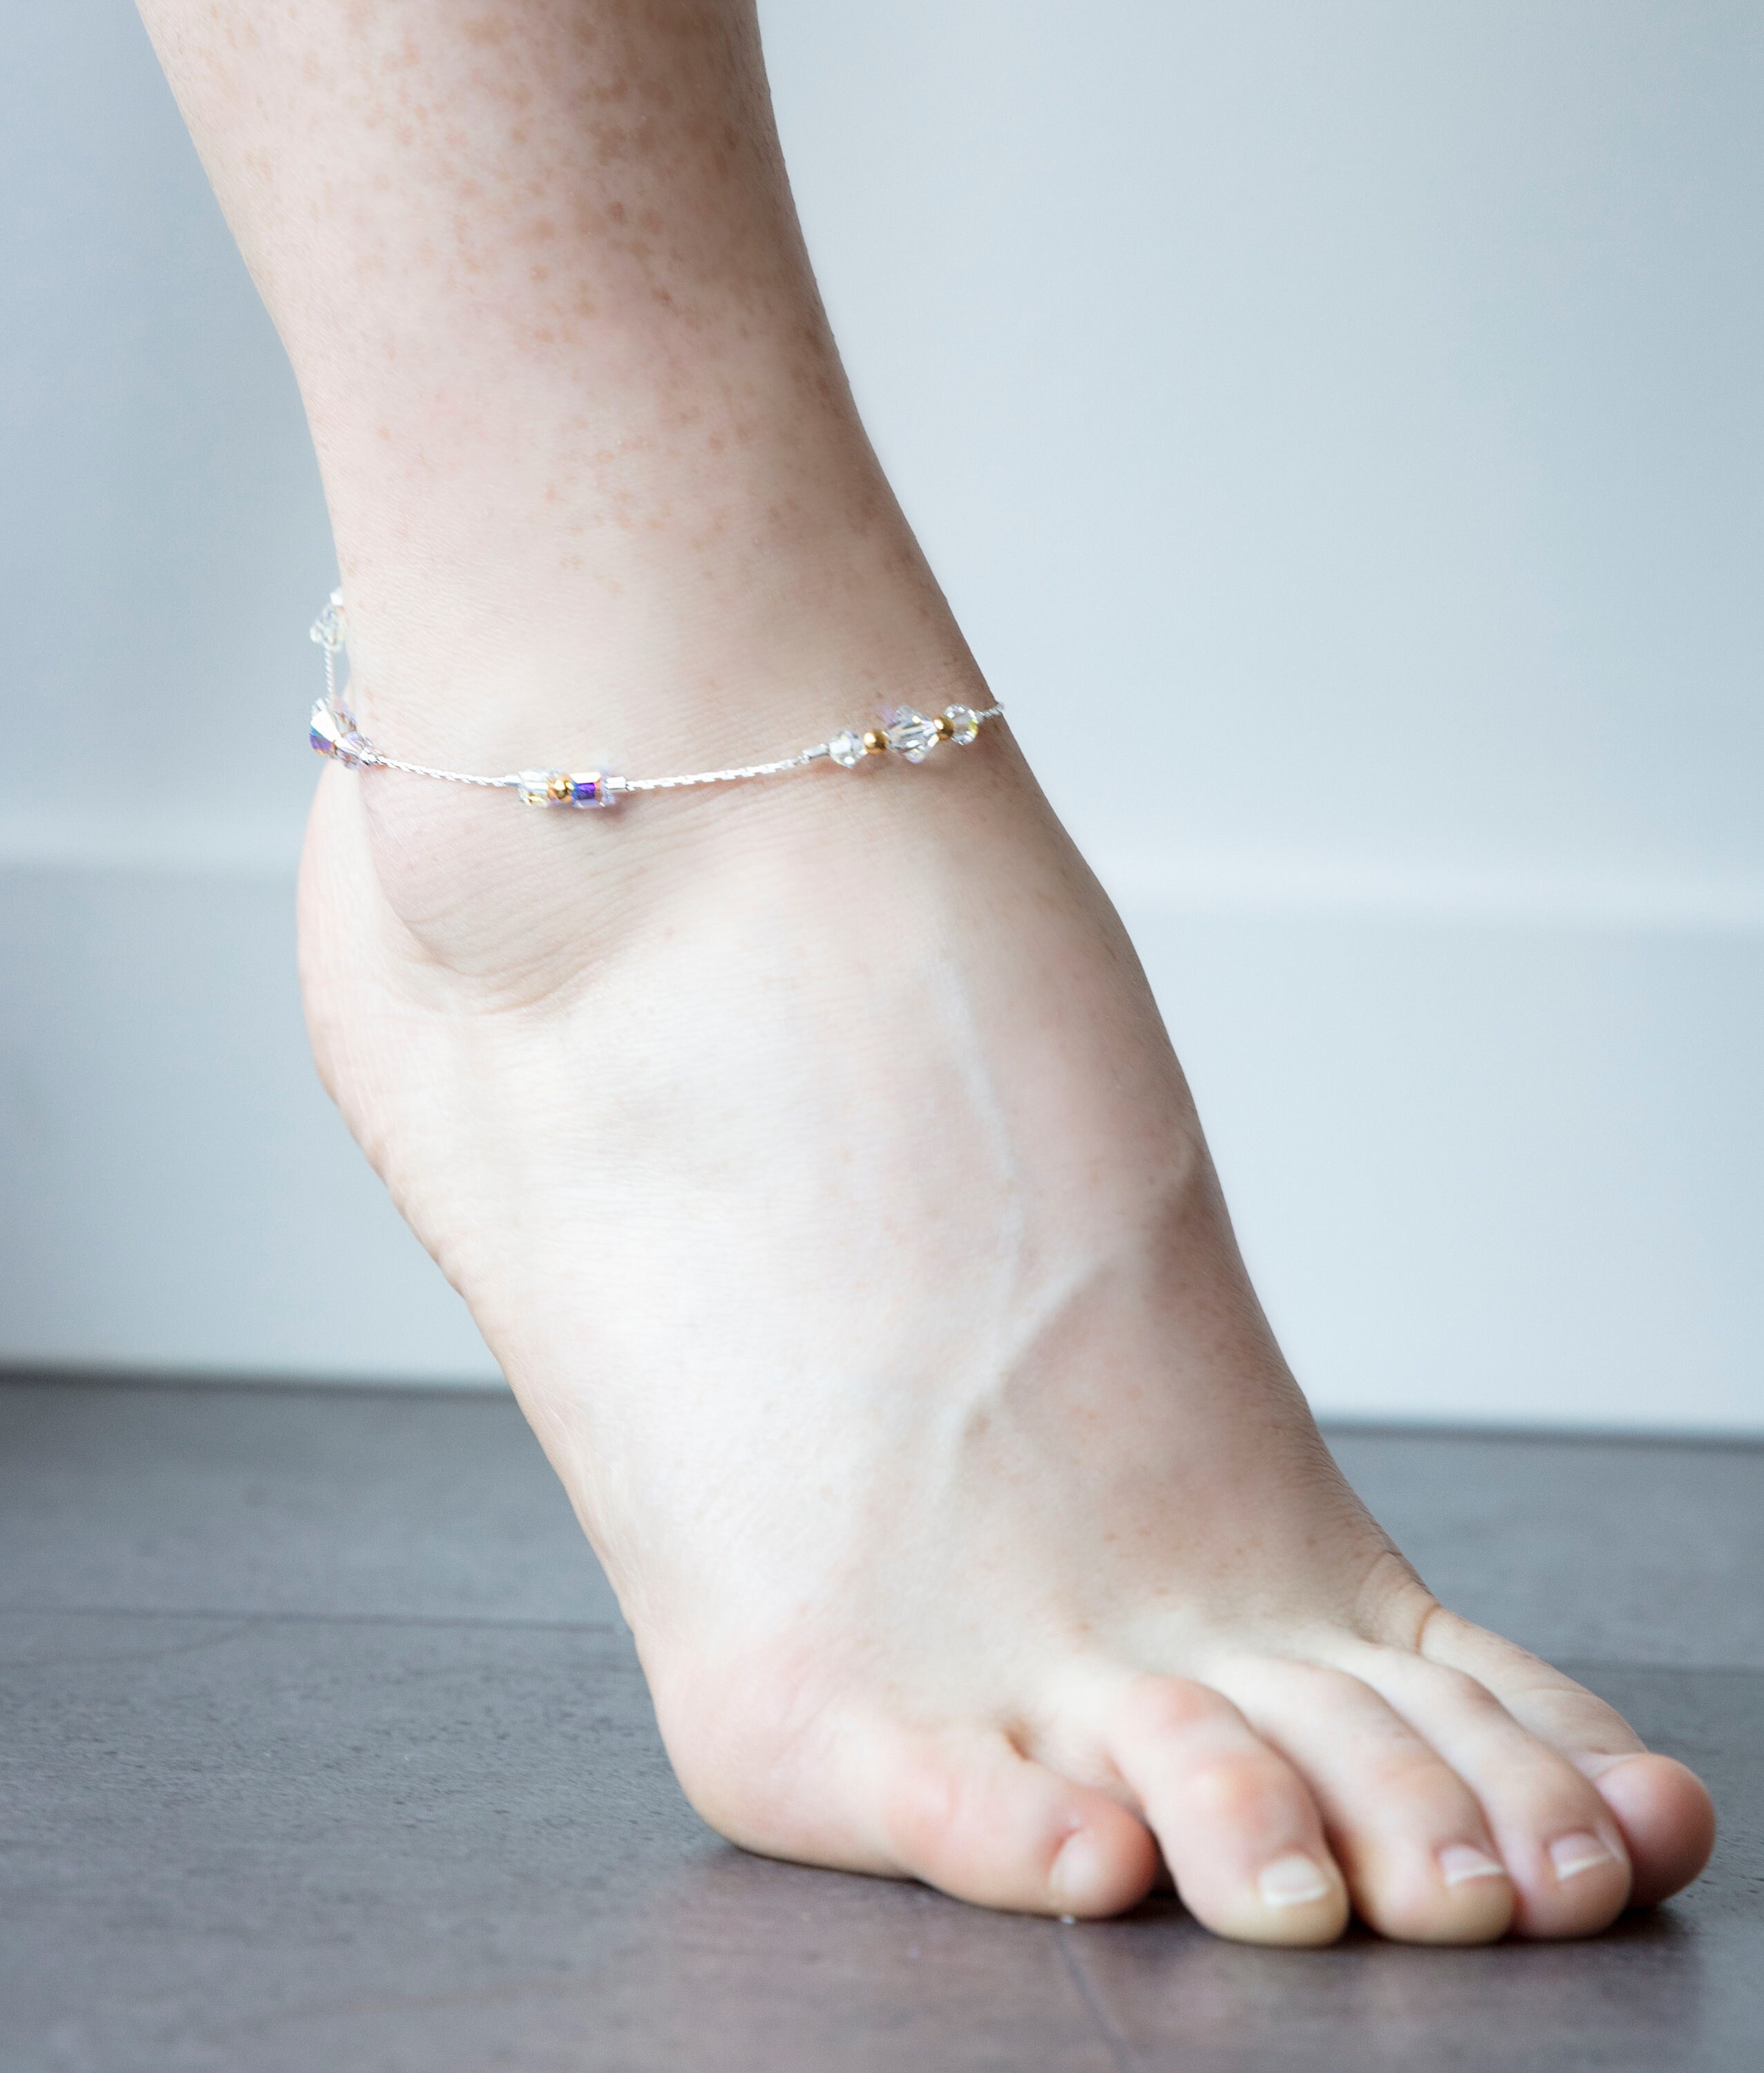 14k Gold Filled 5 Swarovski Crystals Dainty Anklet Foot Piece –  DianaHoDesigns